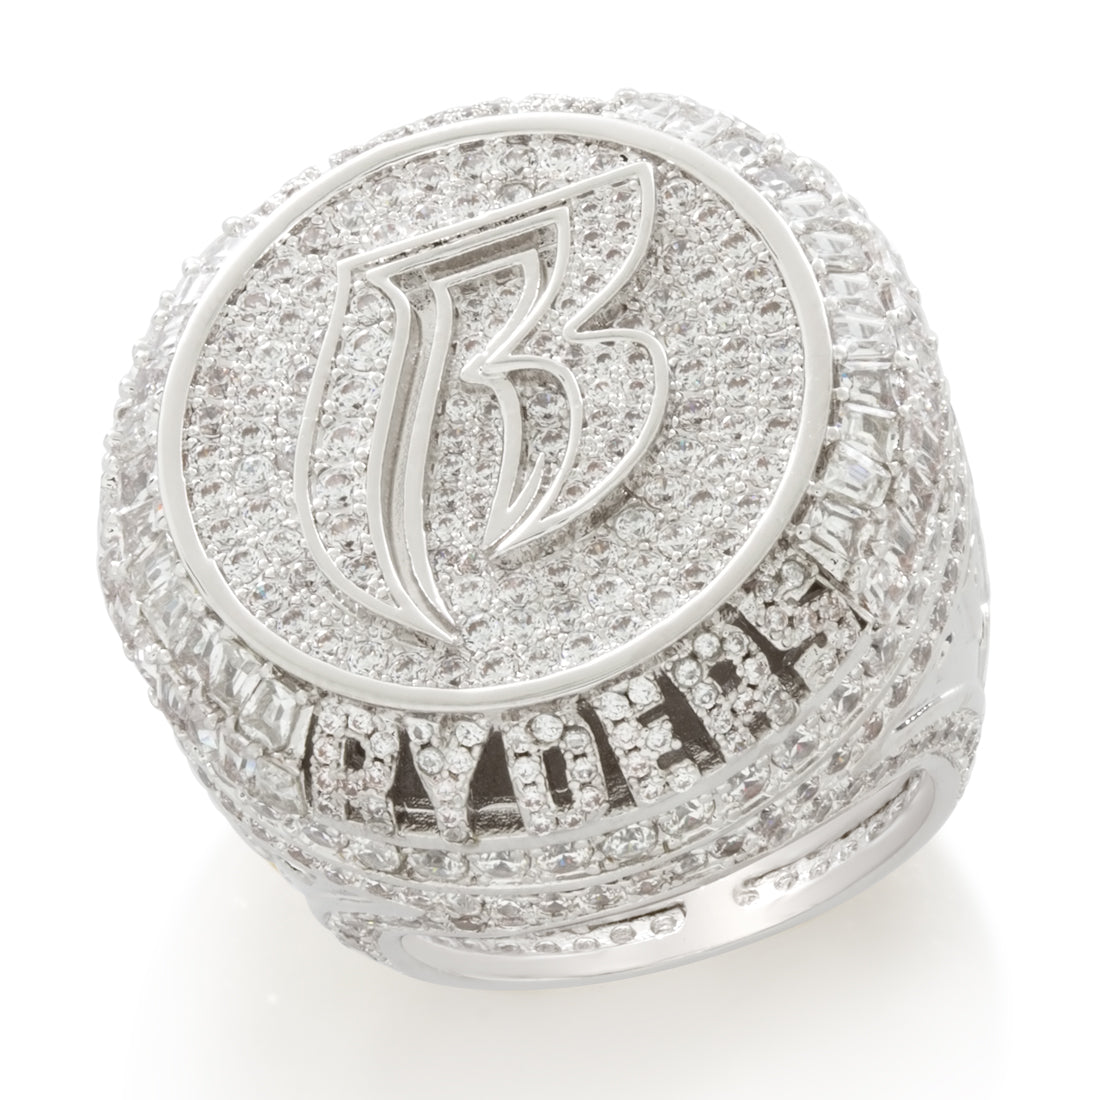 Gold Plated / White Gold / 7 Ruff Ryders x King ice - Championship Ring